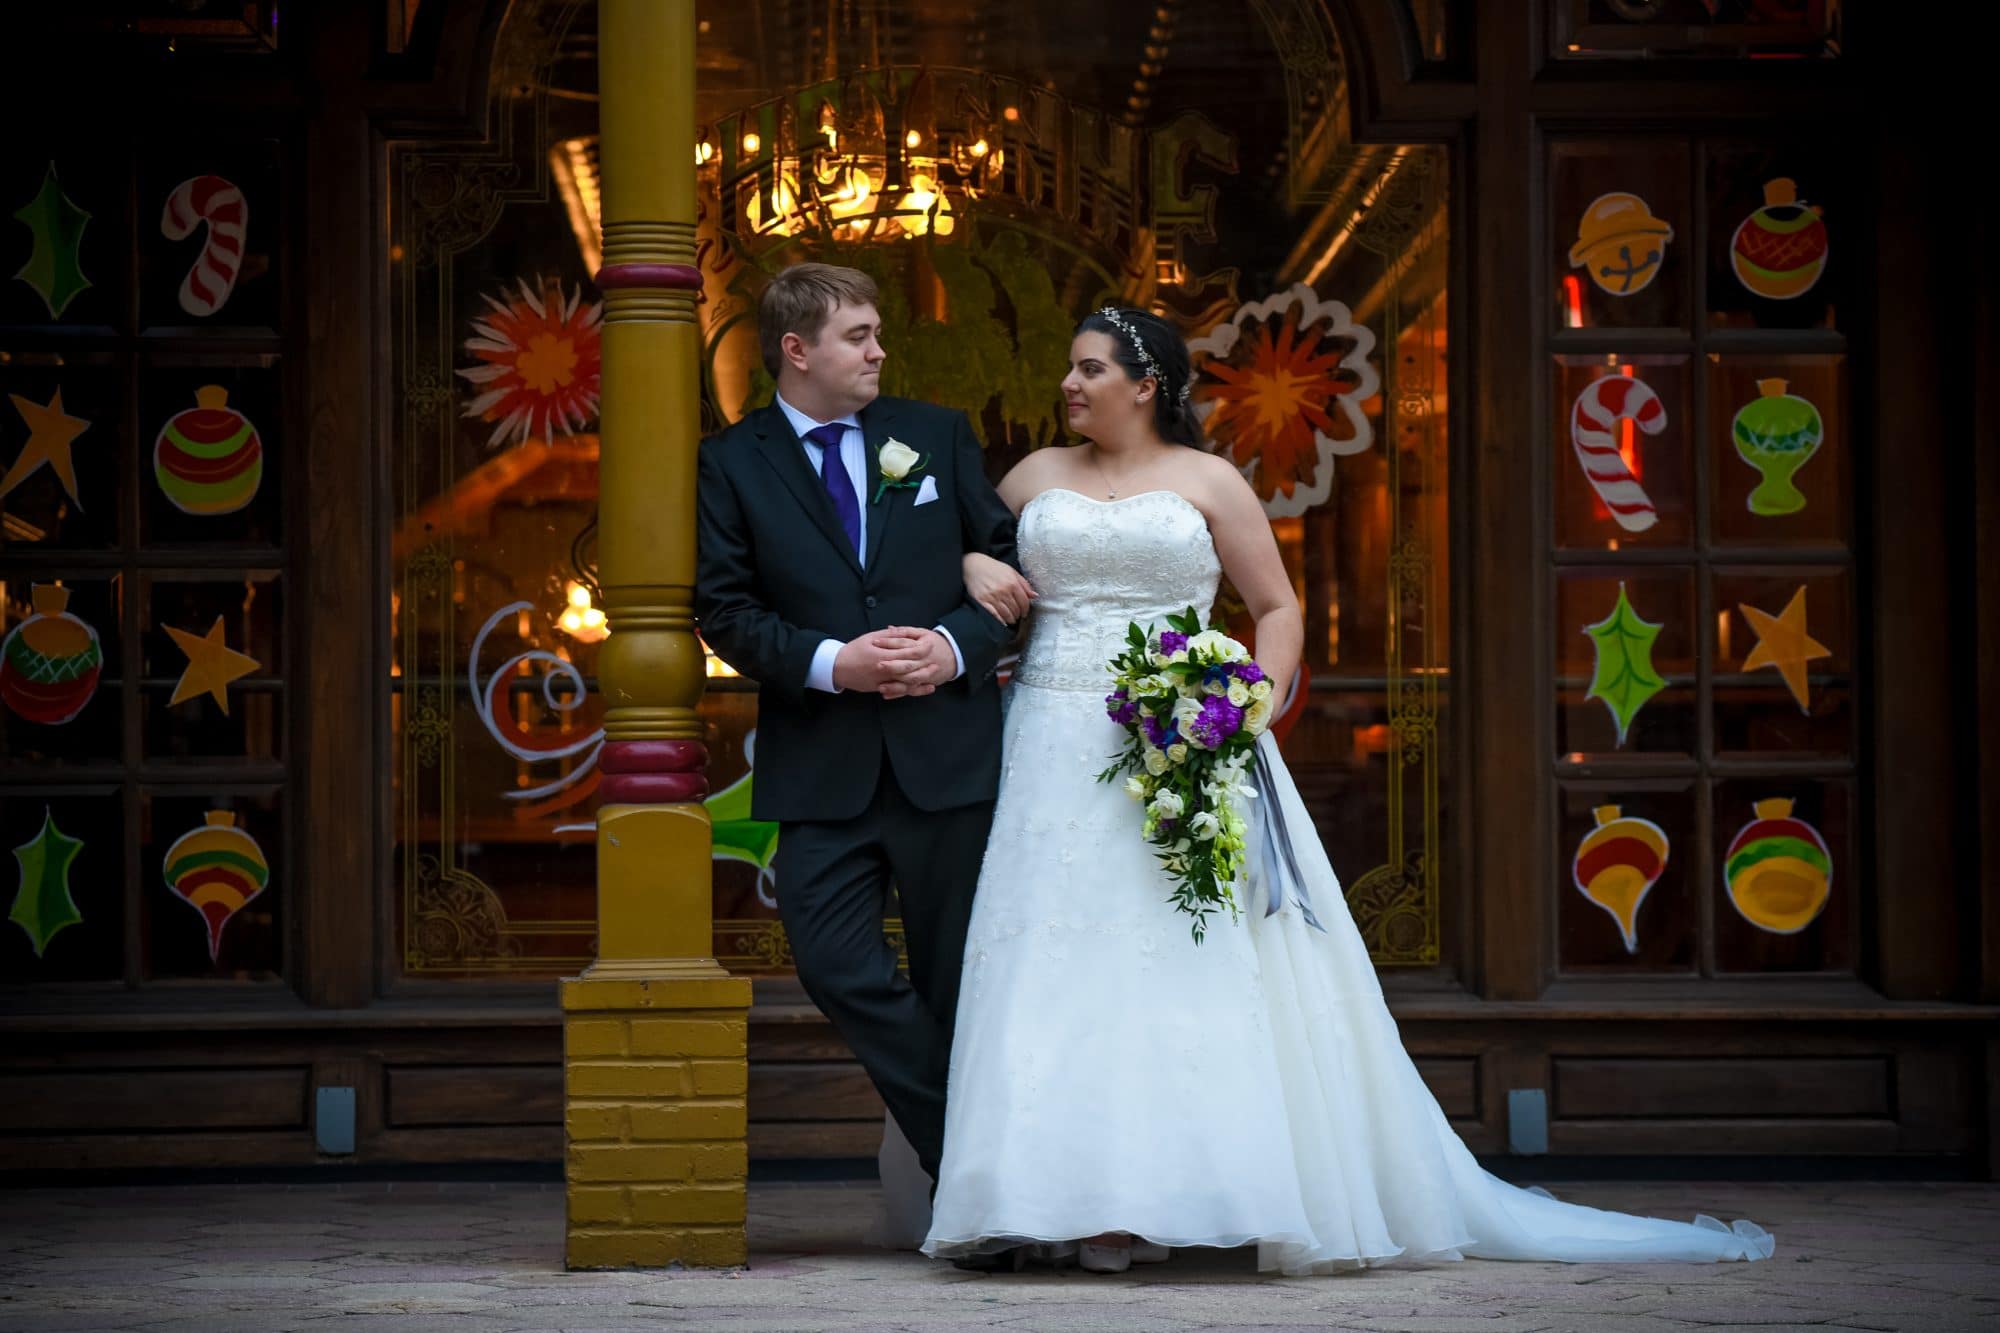 Chris Gillyard Photography - bride and groom in front of storefront with windows painted for Christmas